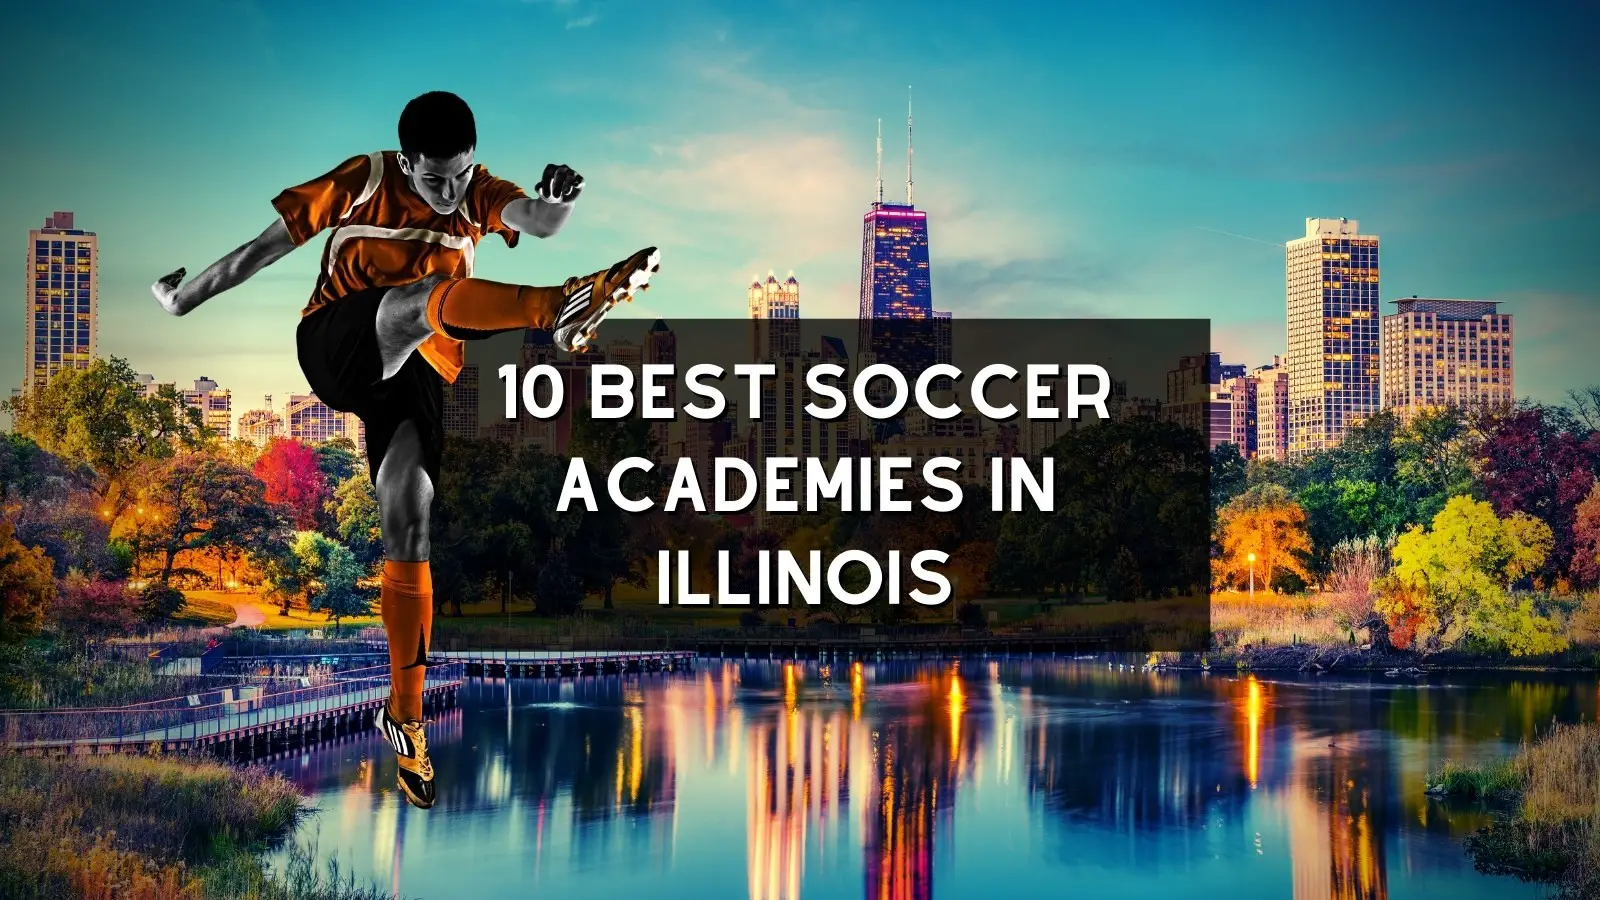 10 Best Soccer Academies In Illinois – (2022) Guide